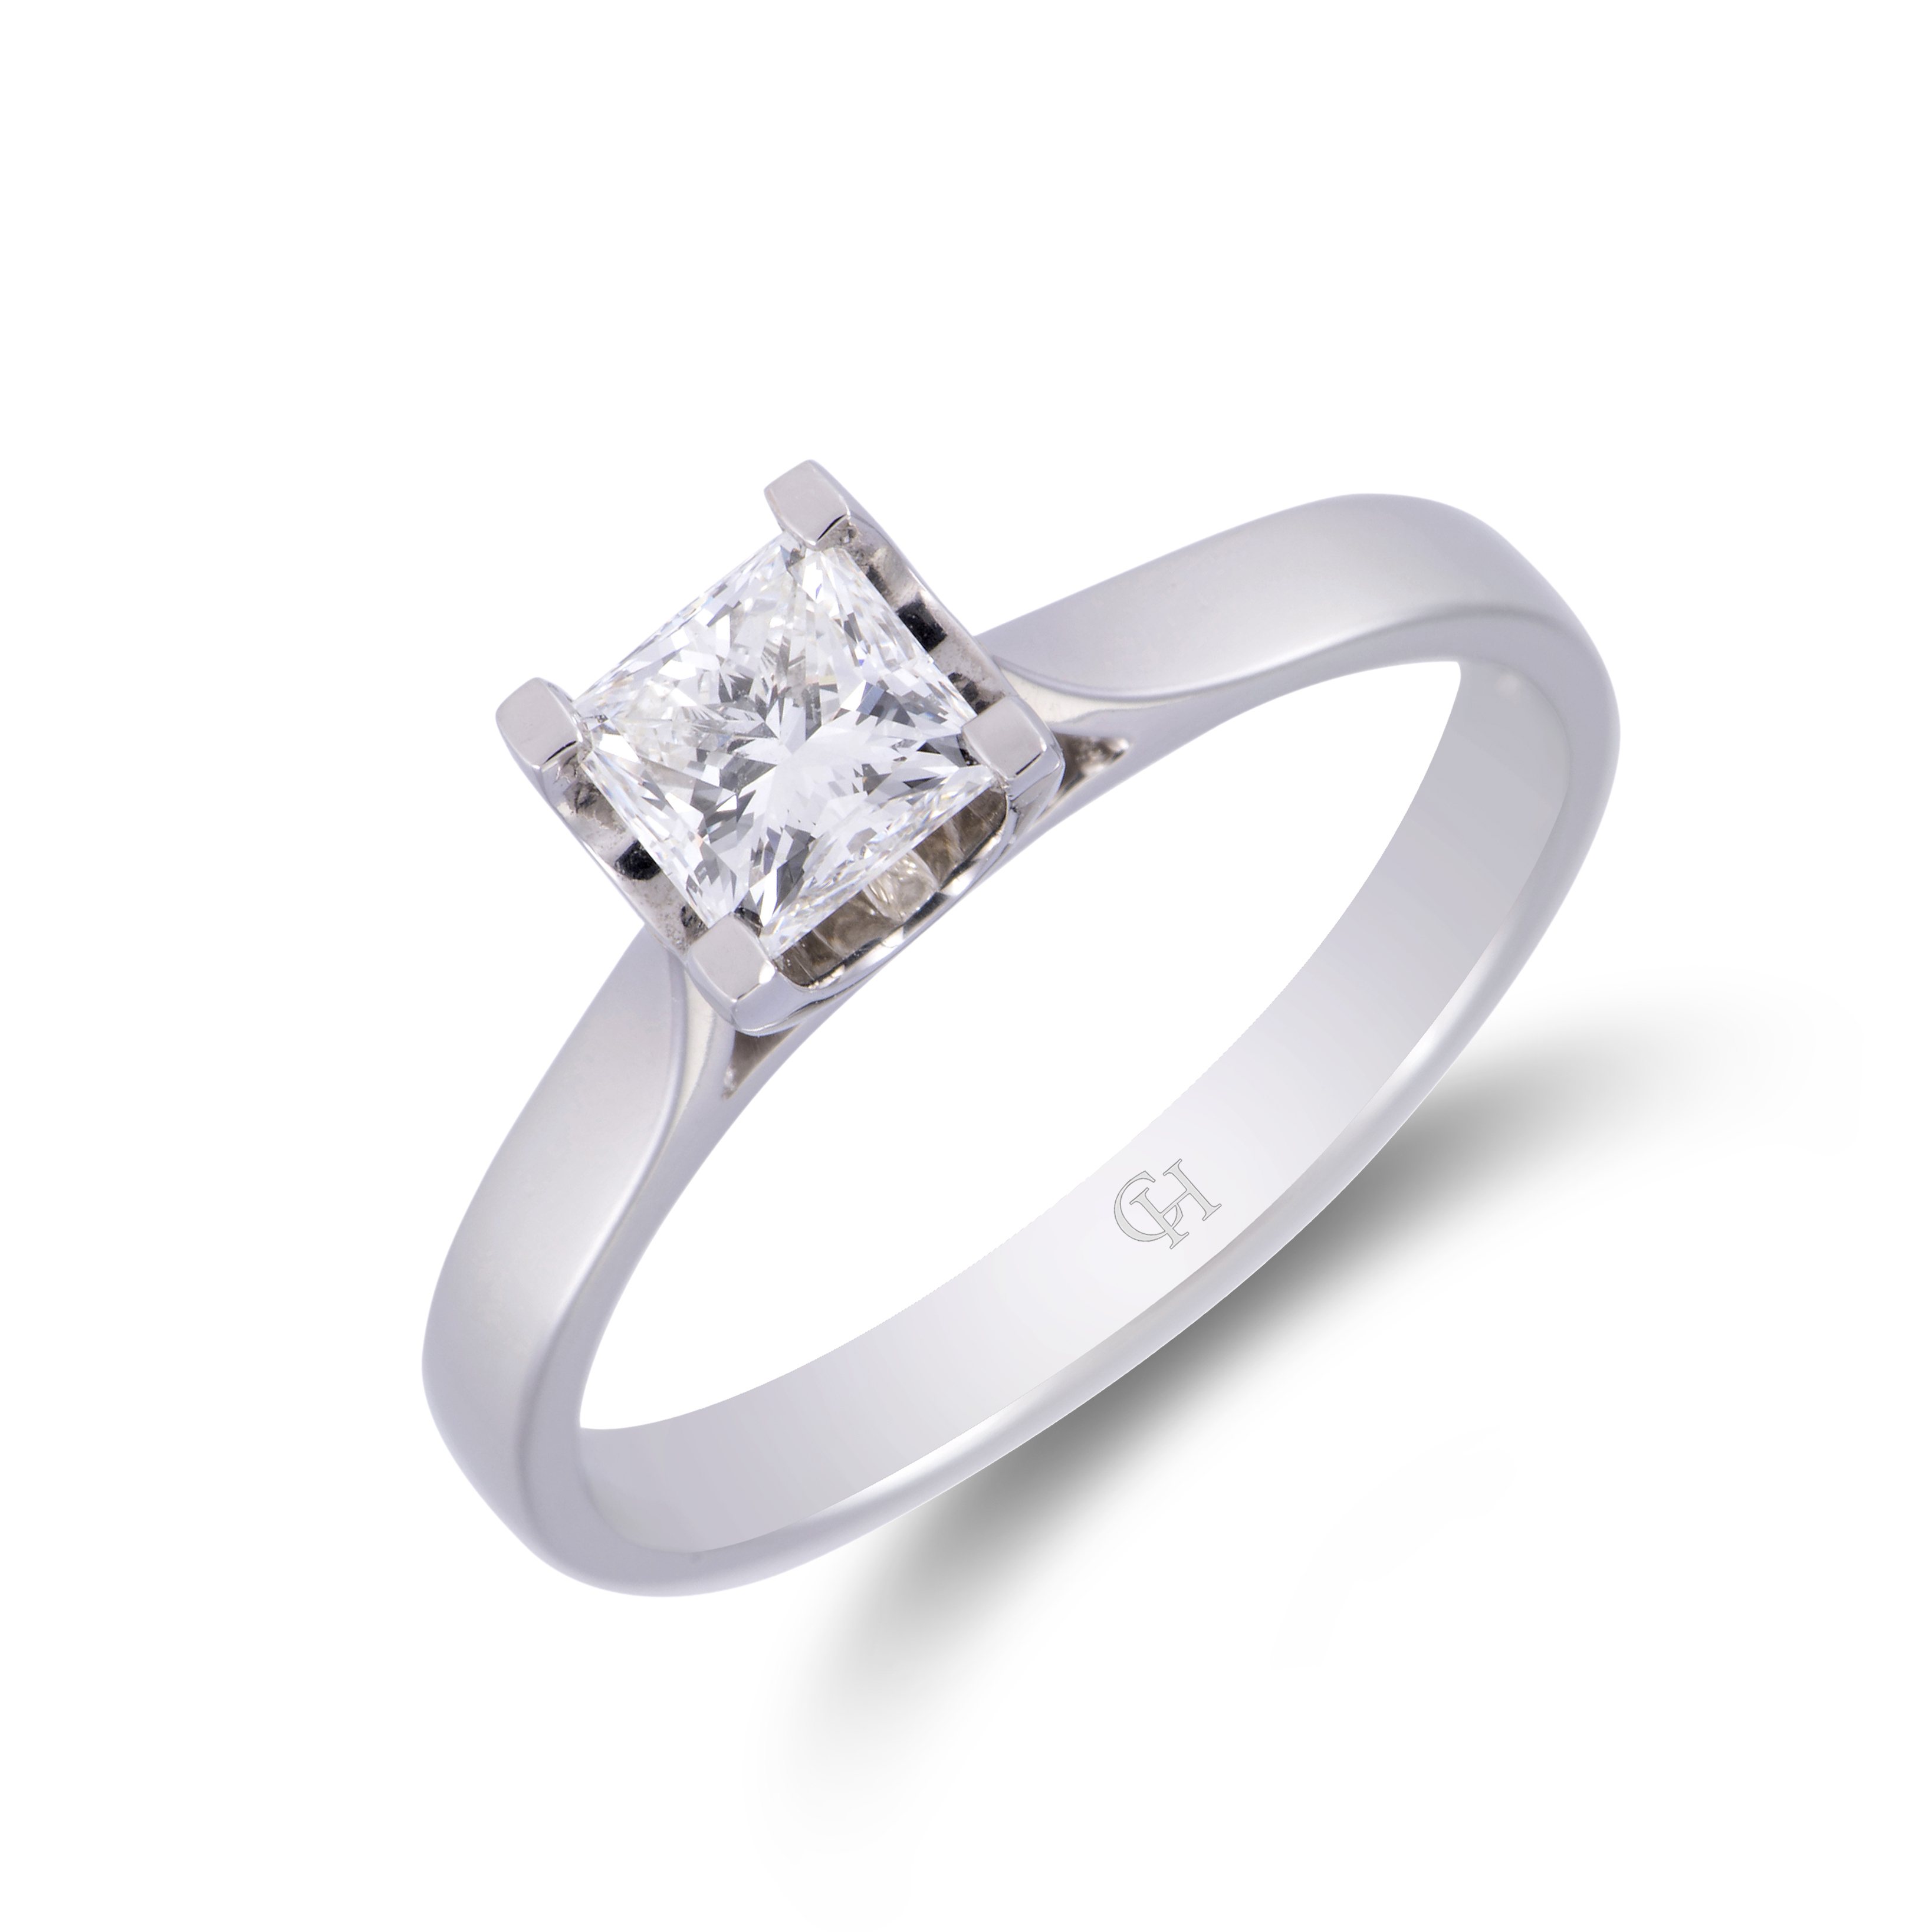 Platinum approx 0.70ct certificated princess cut diamond 4 claw solitaire. Colour F Clarity VVS1